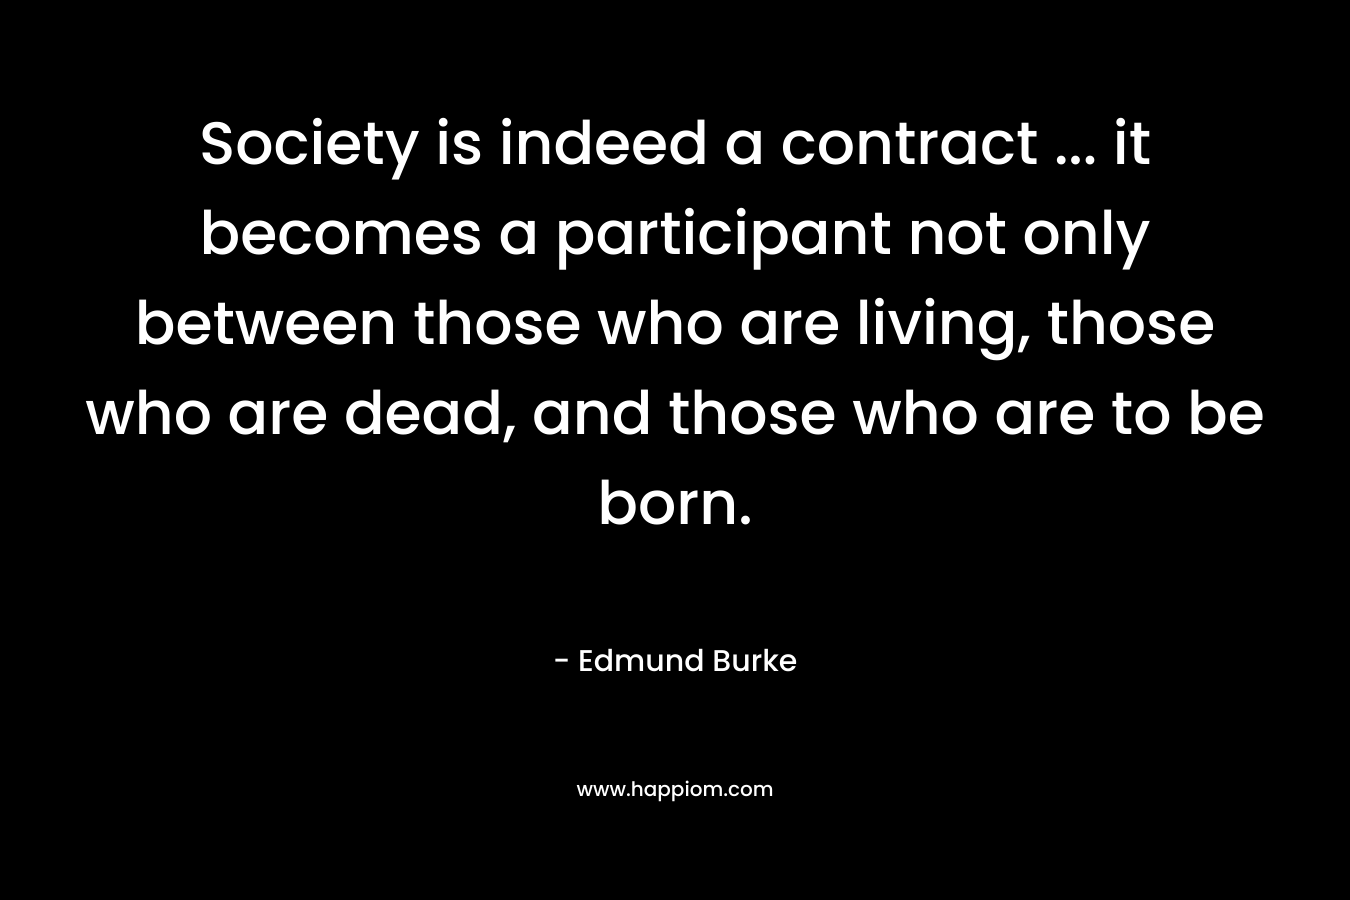 Society is indeed a contract ... it becomes a participant not only between those who are living, those who are dead, and those who are to be born.